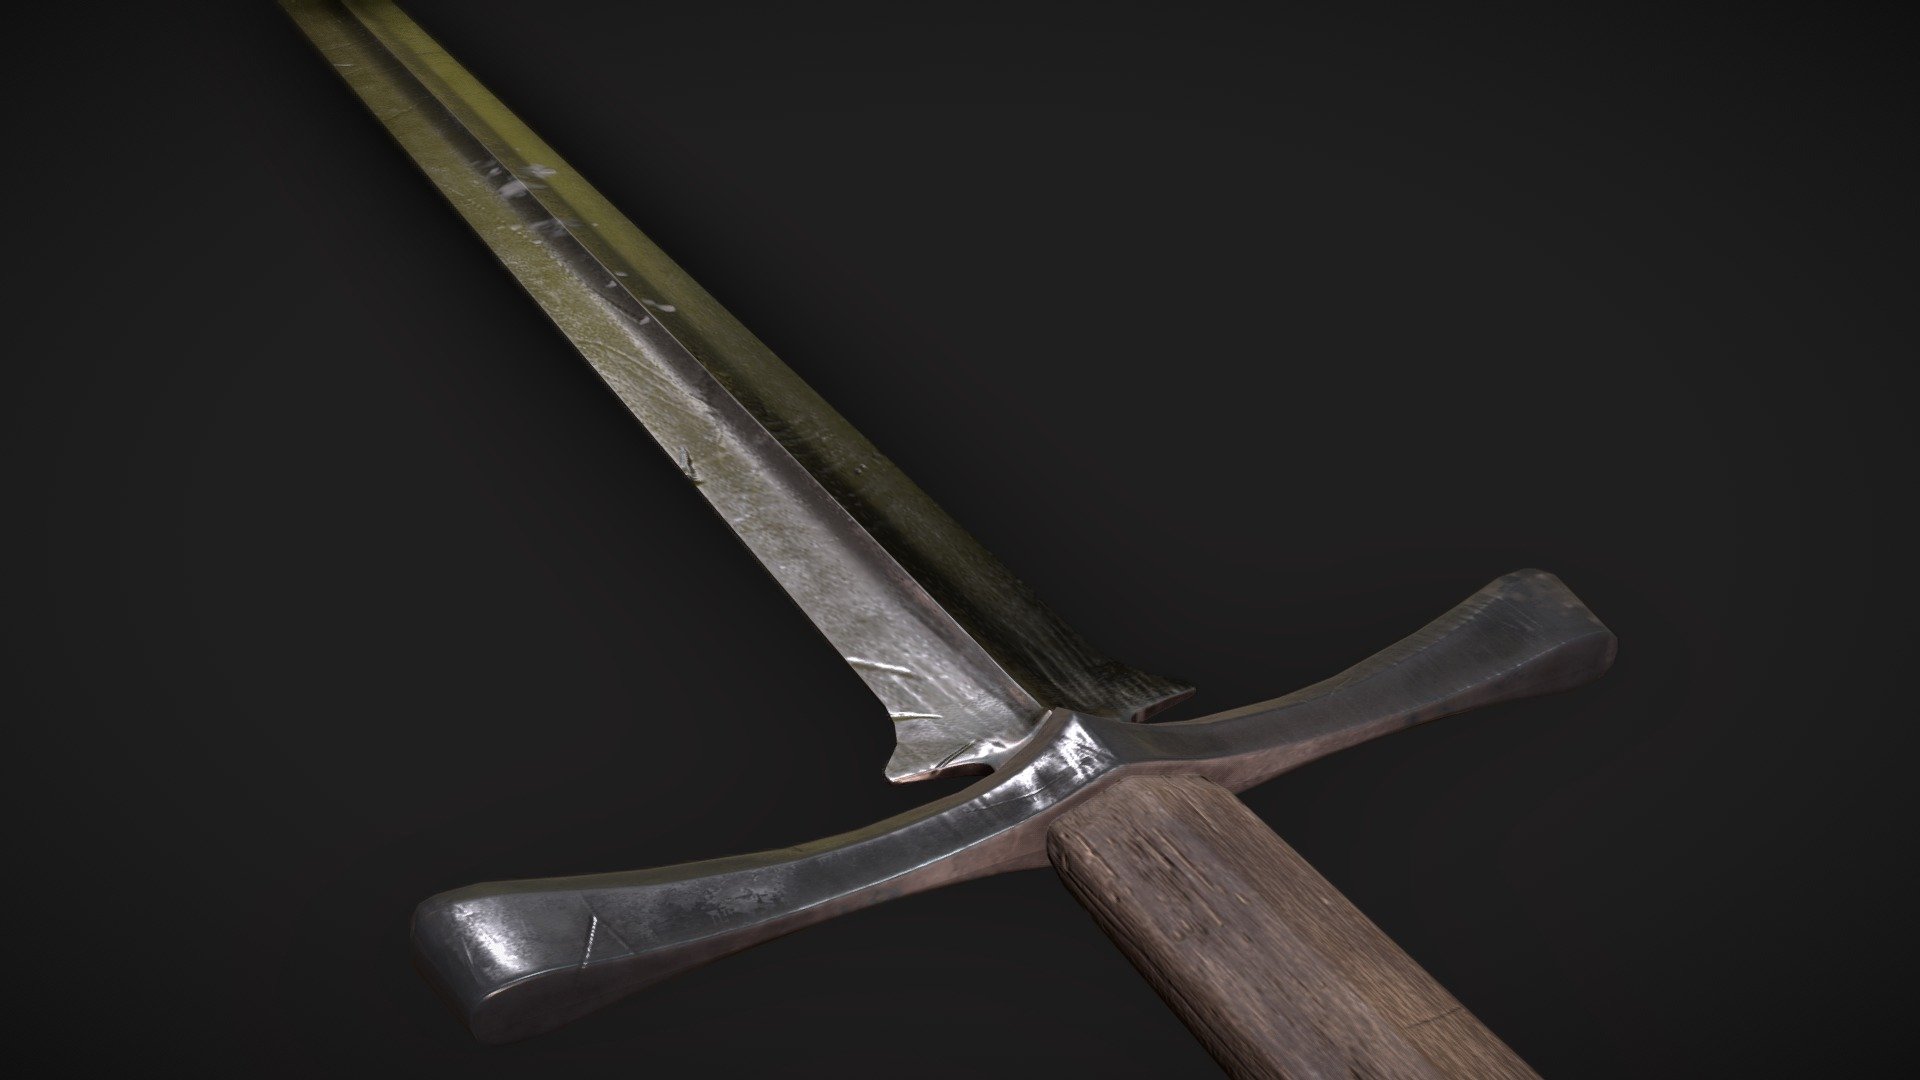 PBR Medieval sword
Optimized for use in a game engine, either for an rpg game or visualization 3d model